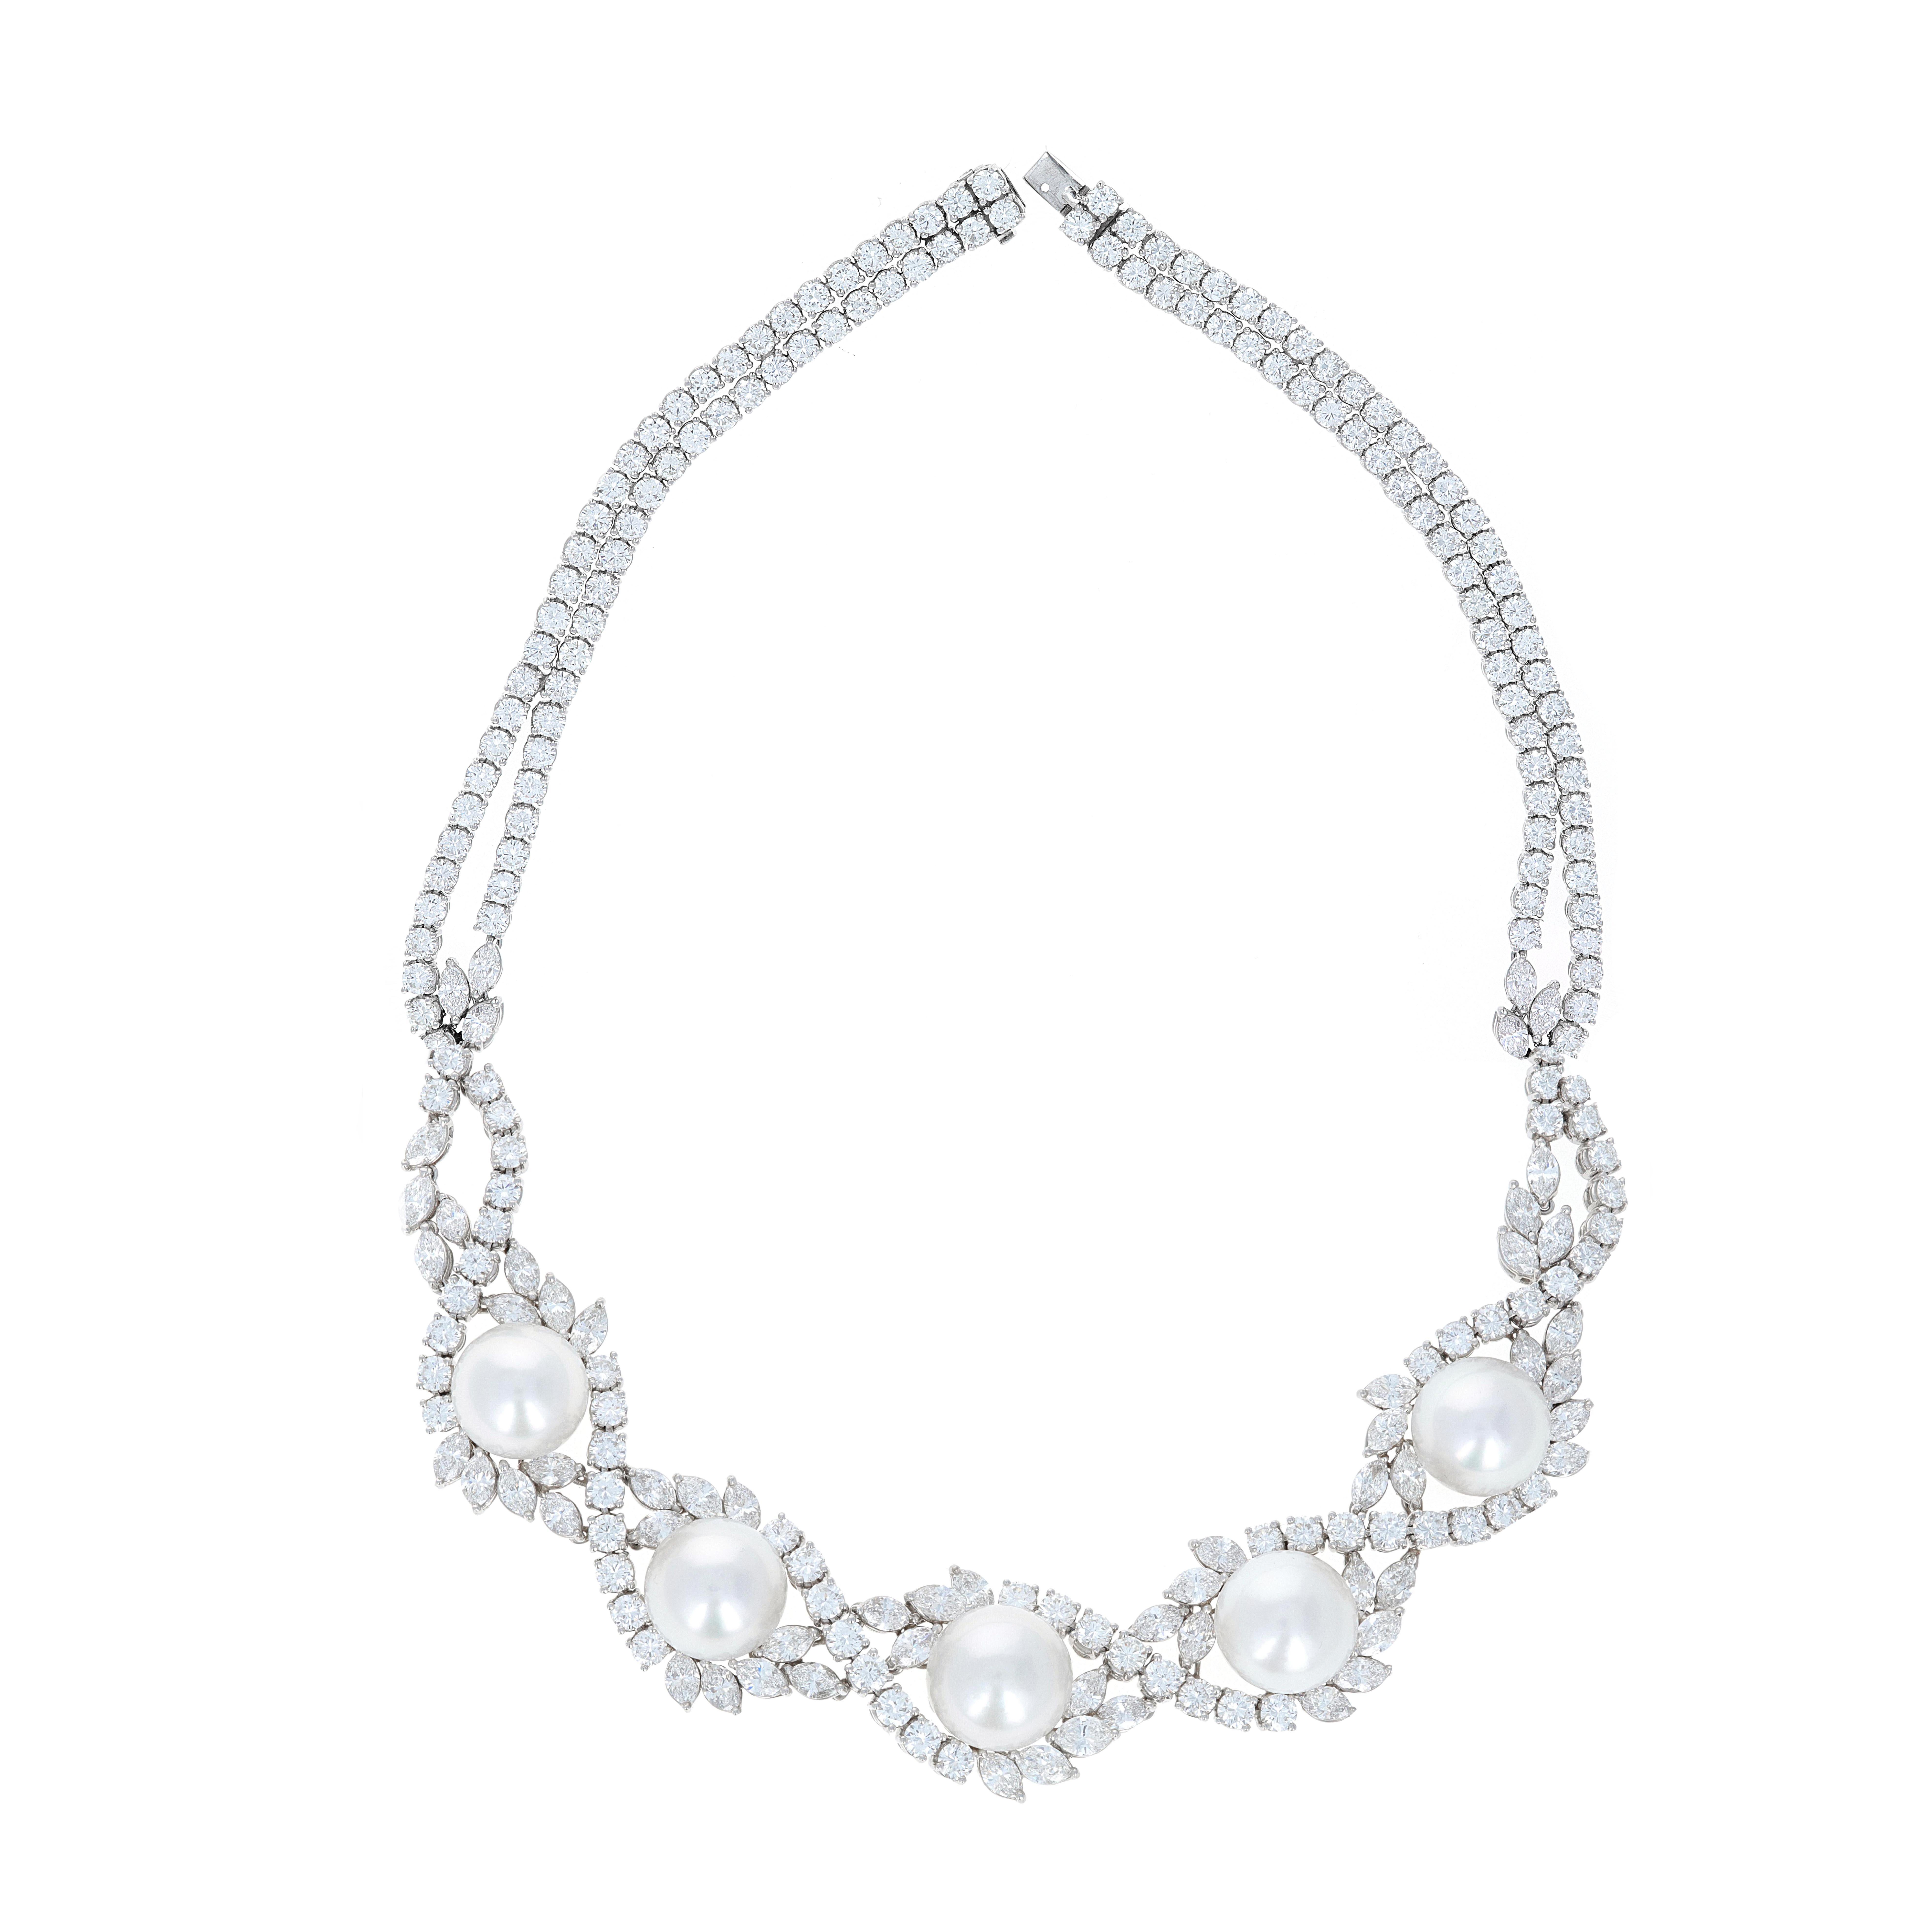 Platinum diamond and pearl necklace, earring & ring set .
The necklace has 232 white diamonds that are round and marquise. The total diamond weight of the necklace is 43.00 carats. The 5 pearls on the necklace measure 14.0mm; 14.5mm; 15.00mm; 14.6mm